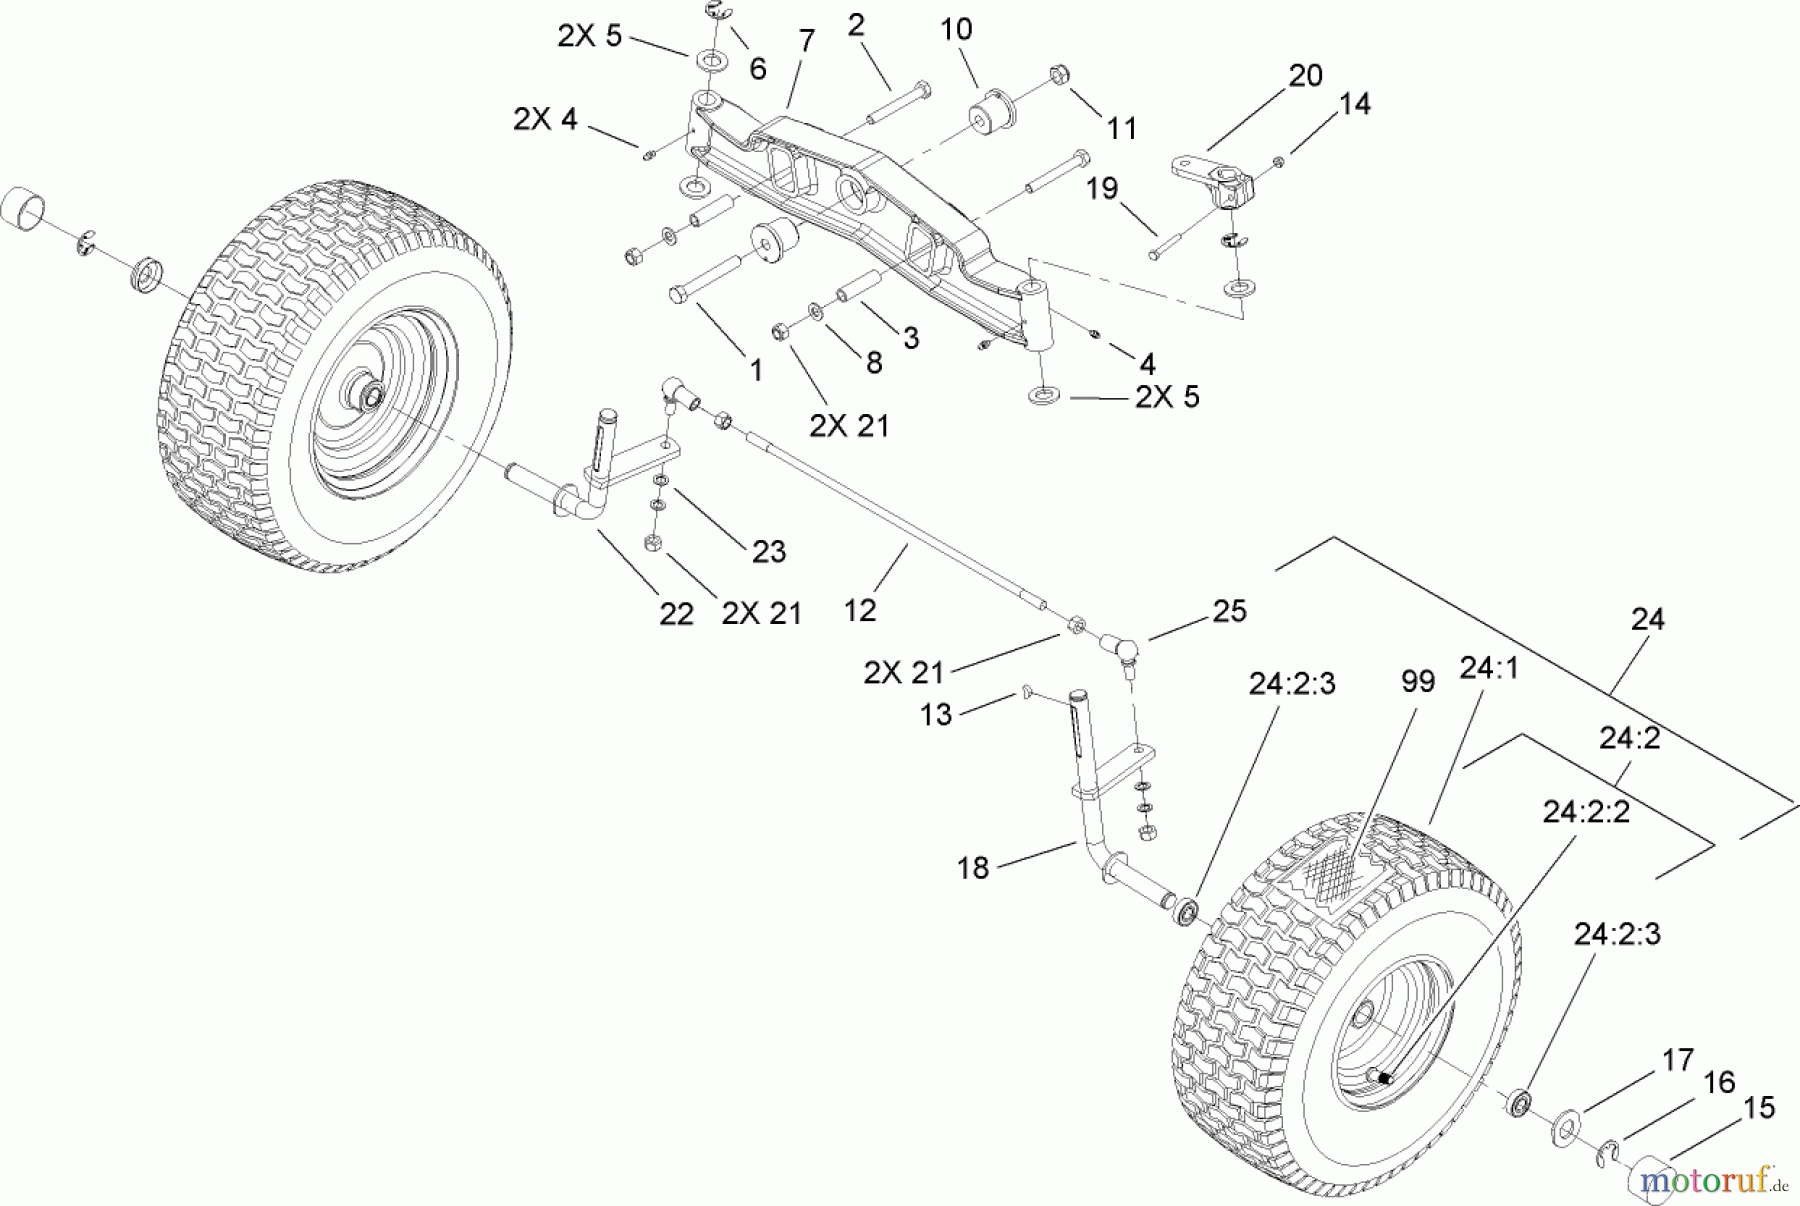  Toro Neu Mowers, Lawn & Garden Tractor Seite 1 74592 (DH 220) - Toro DH 220 Lawn Tractor, 2007 (270000001-270000651) FRONT AXLE ASSEMBLY